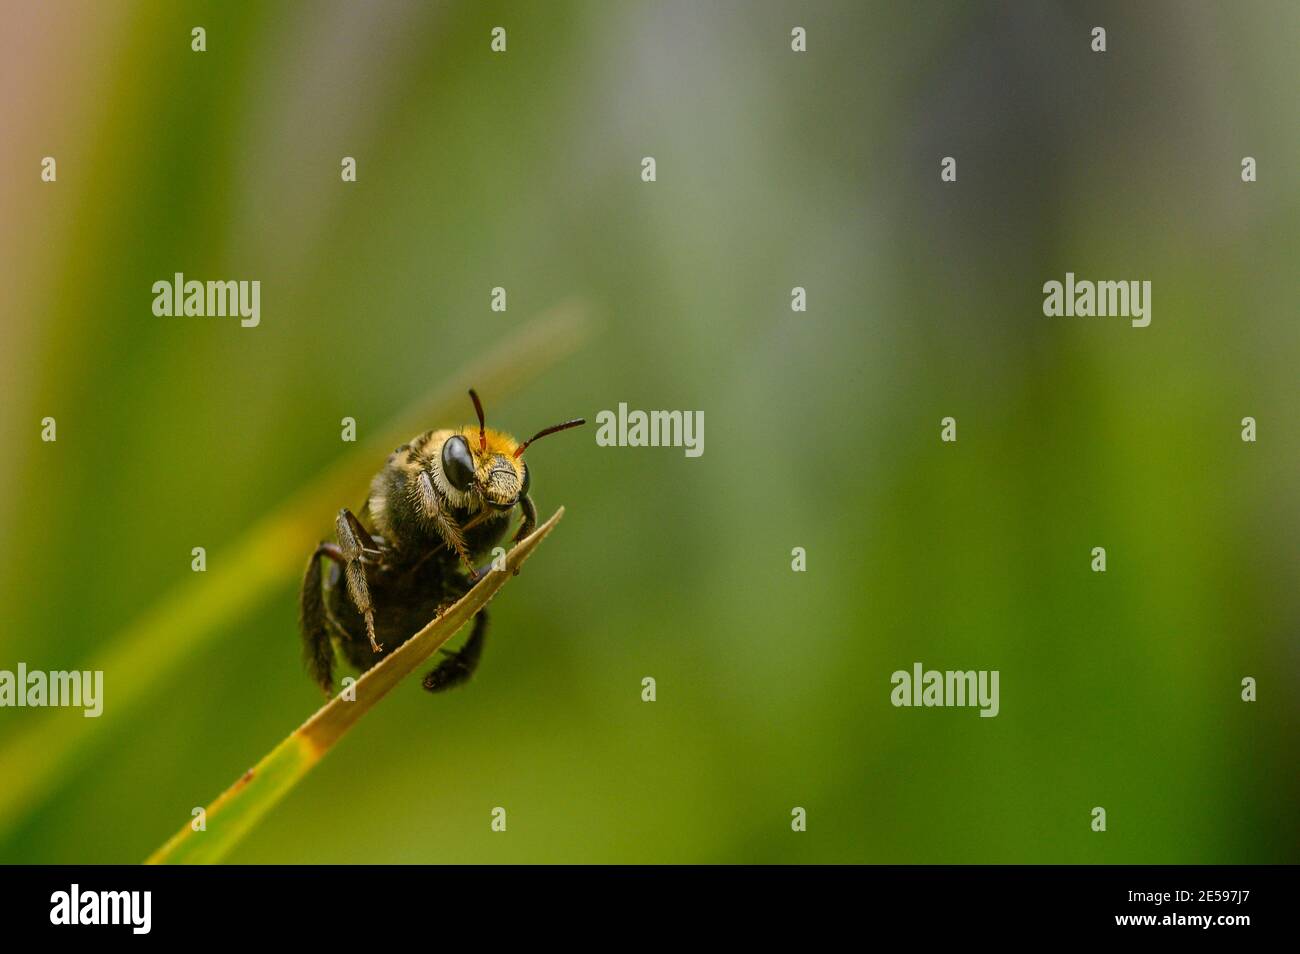 Macro shot of a single bee standing on a thin leaf with blurred green background Stock Photo